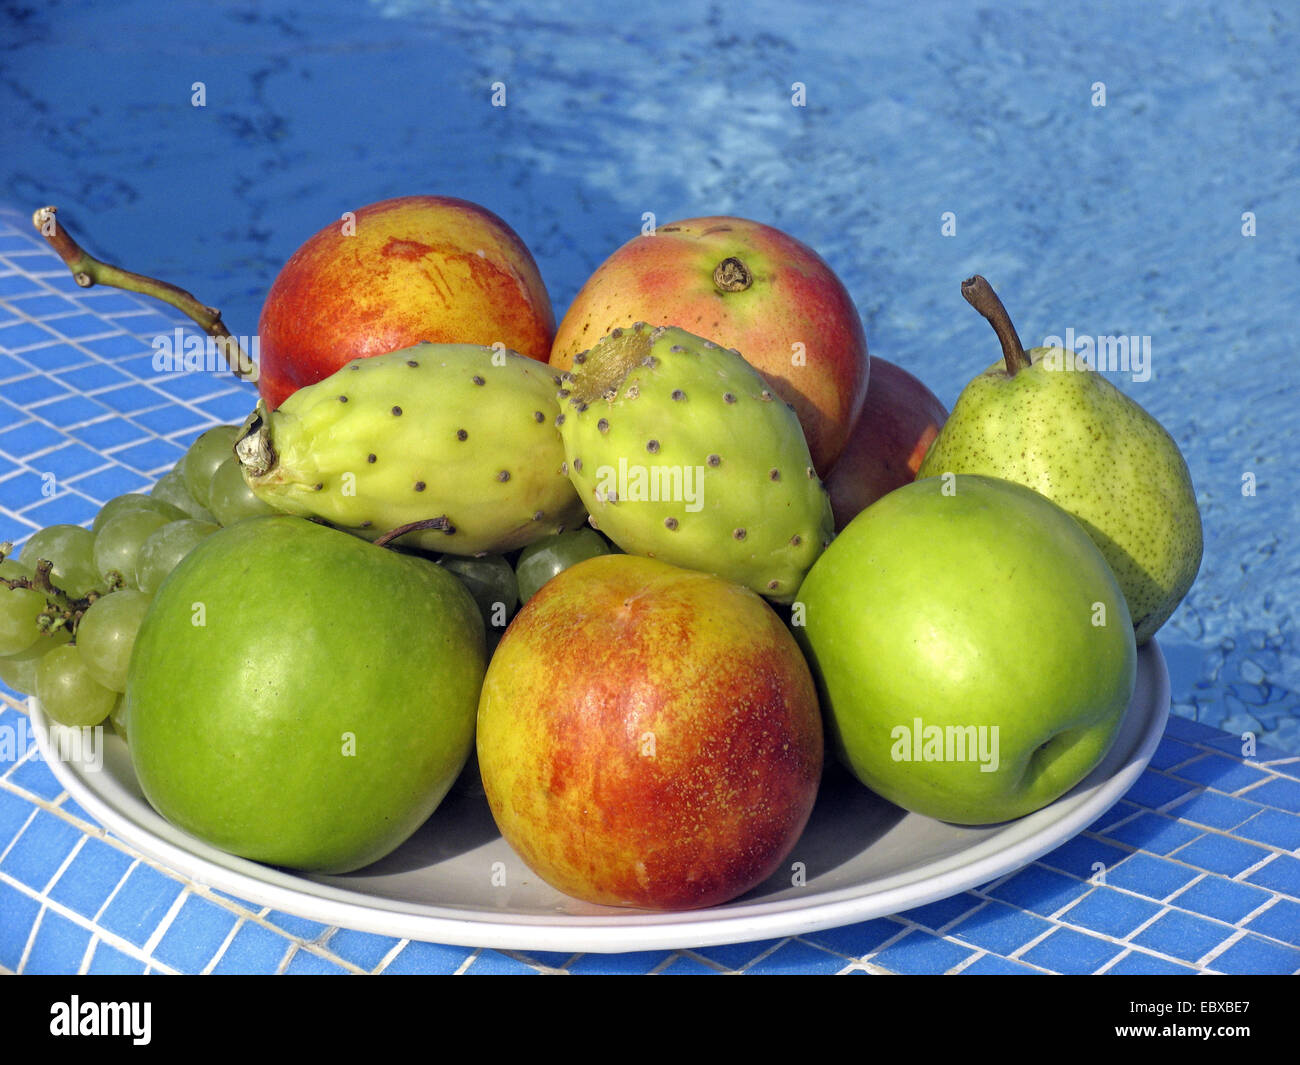 fruits (apples, pears, grapes and prickly pears) on  plate by the pool Stock Photo